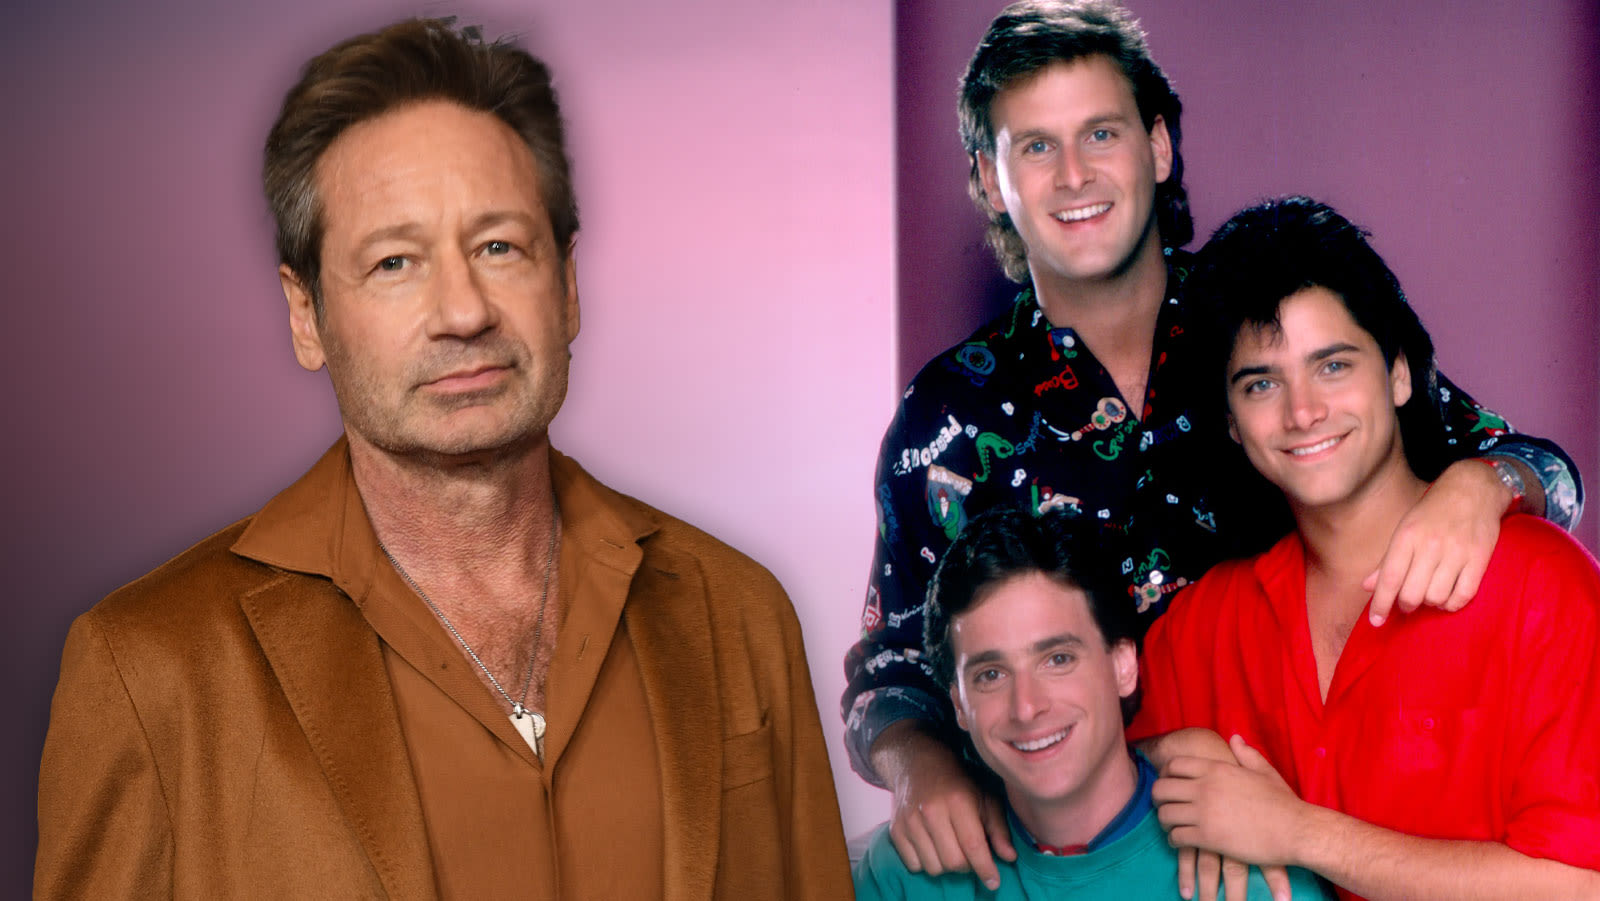 David Duchovny Recalls Losing Out On All 3 Male Lead Roles On ‘Full House’ Following Audition